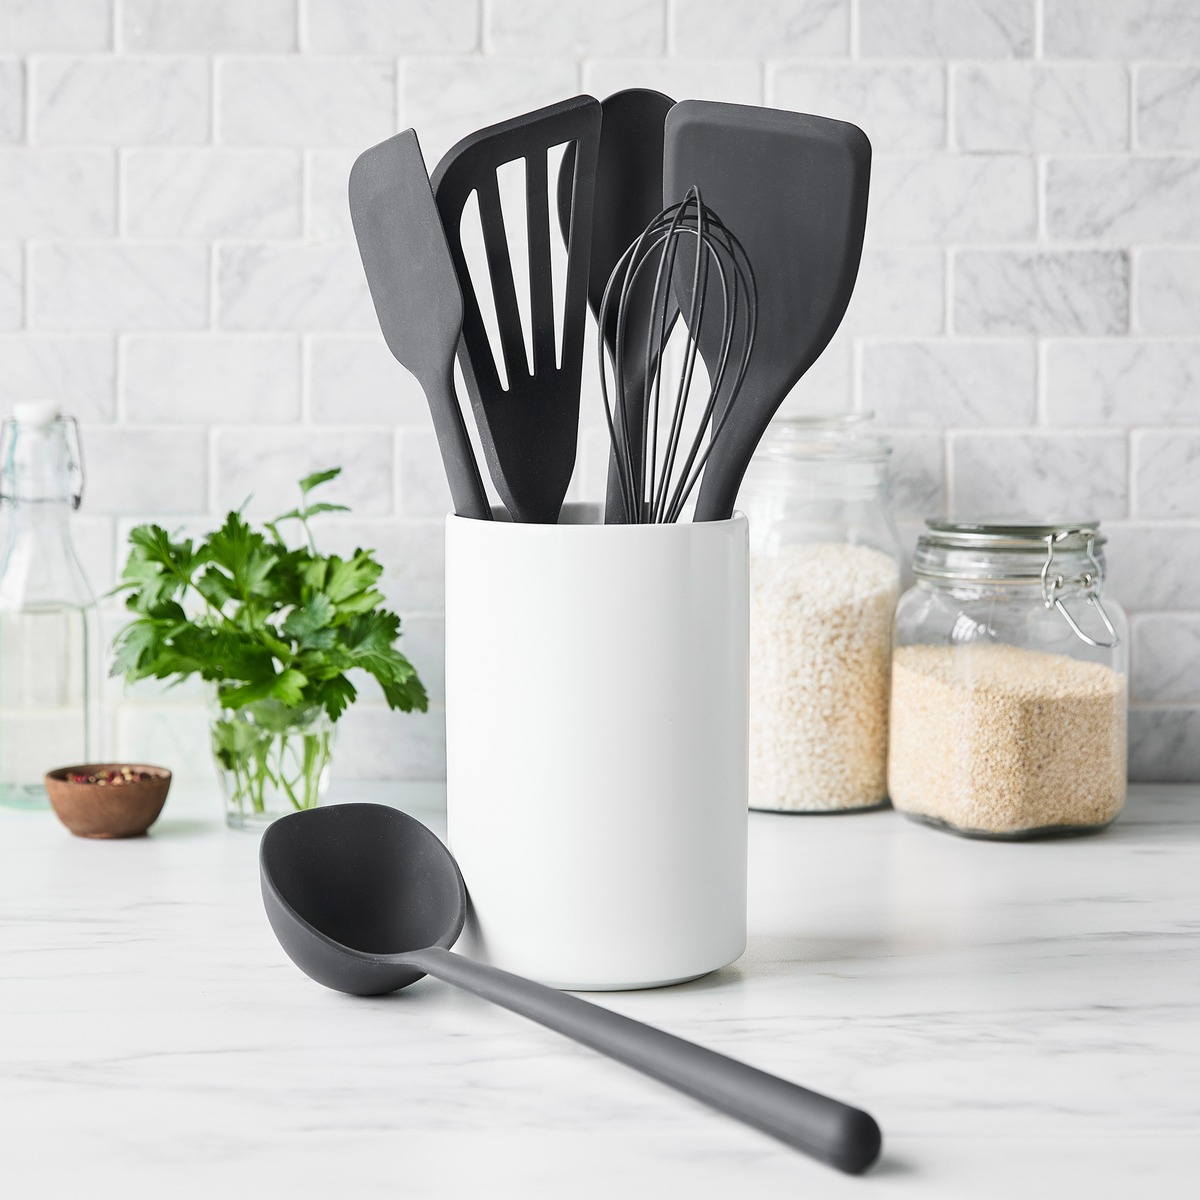  - Shop by Category - Utensils